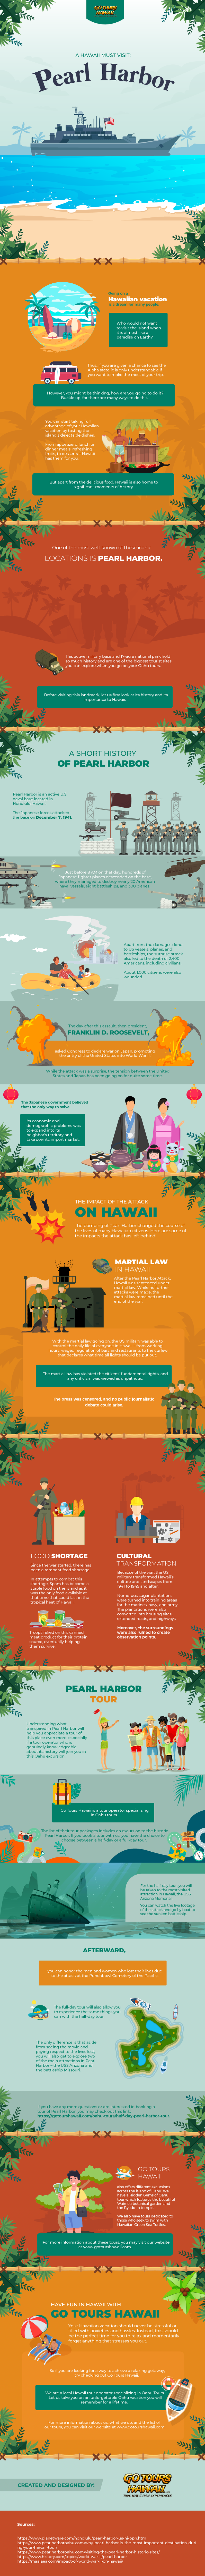 Hawaii-Tourist-Spot-Welcome-to-Pearl-Harbor-infographic-image-HUFAS2